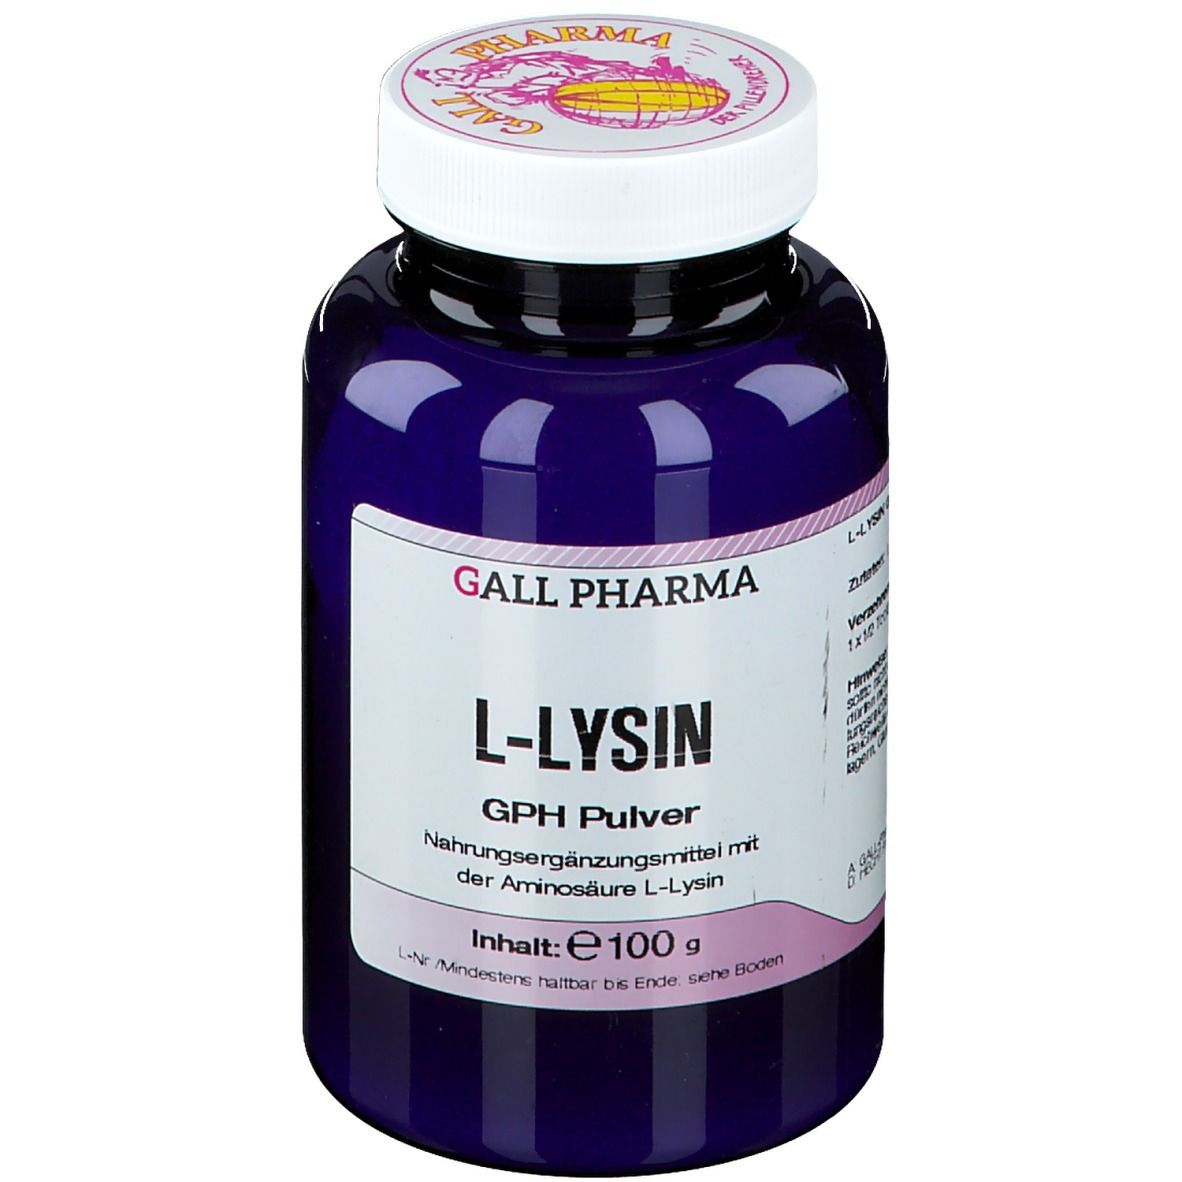 Image of GALL PHARMA L-Lysin Pulver